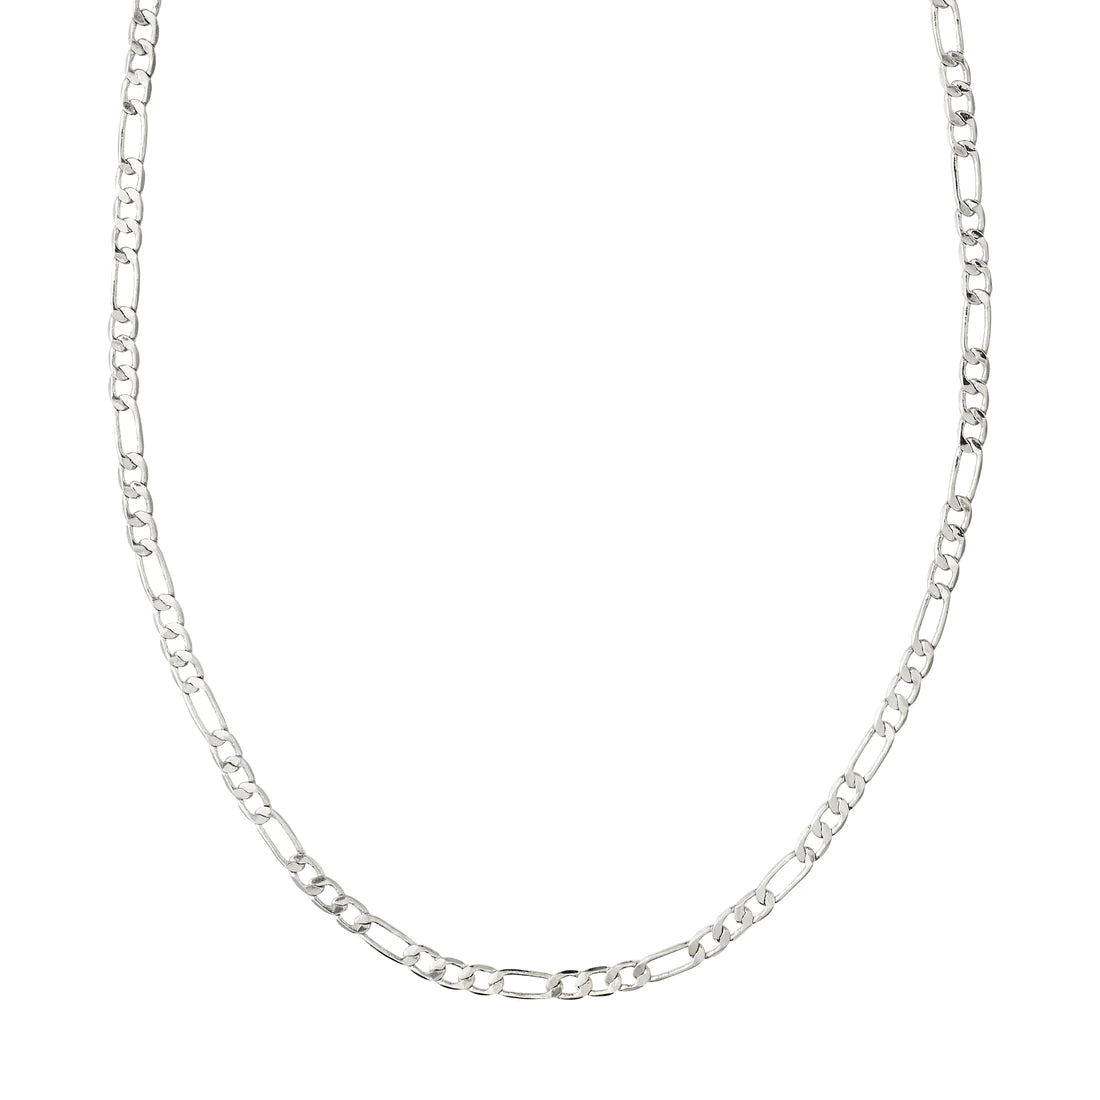 Pilgrim DALE Recycled Open Curb Chain Necklace Silver-Plated